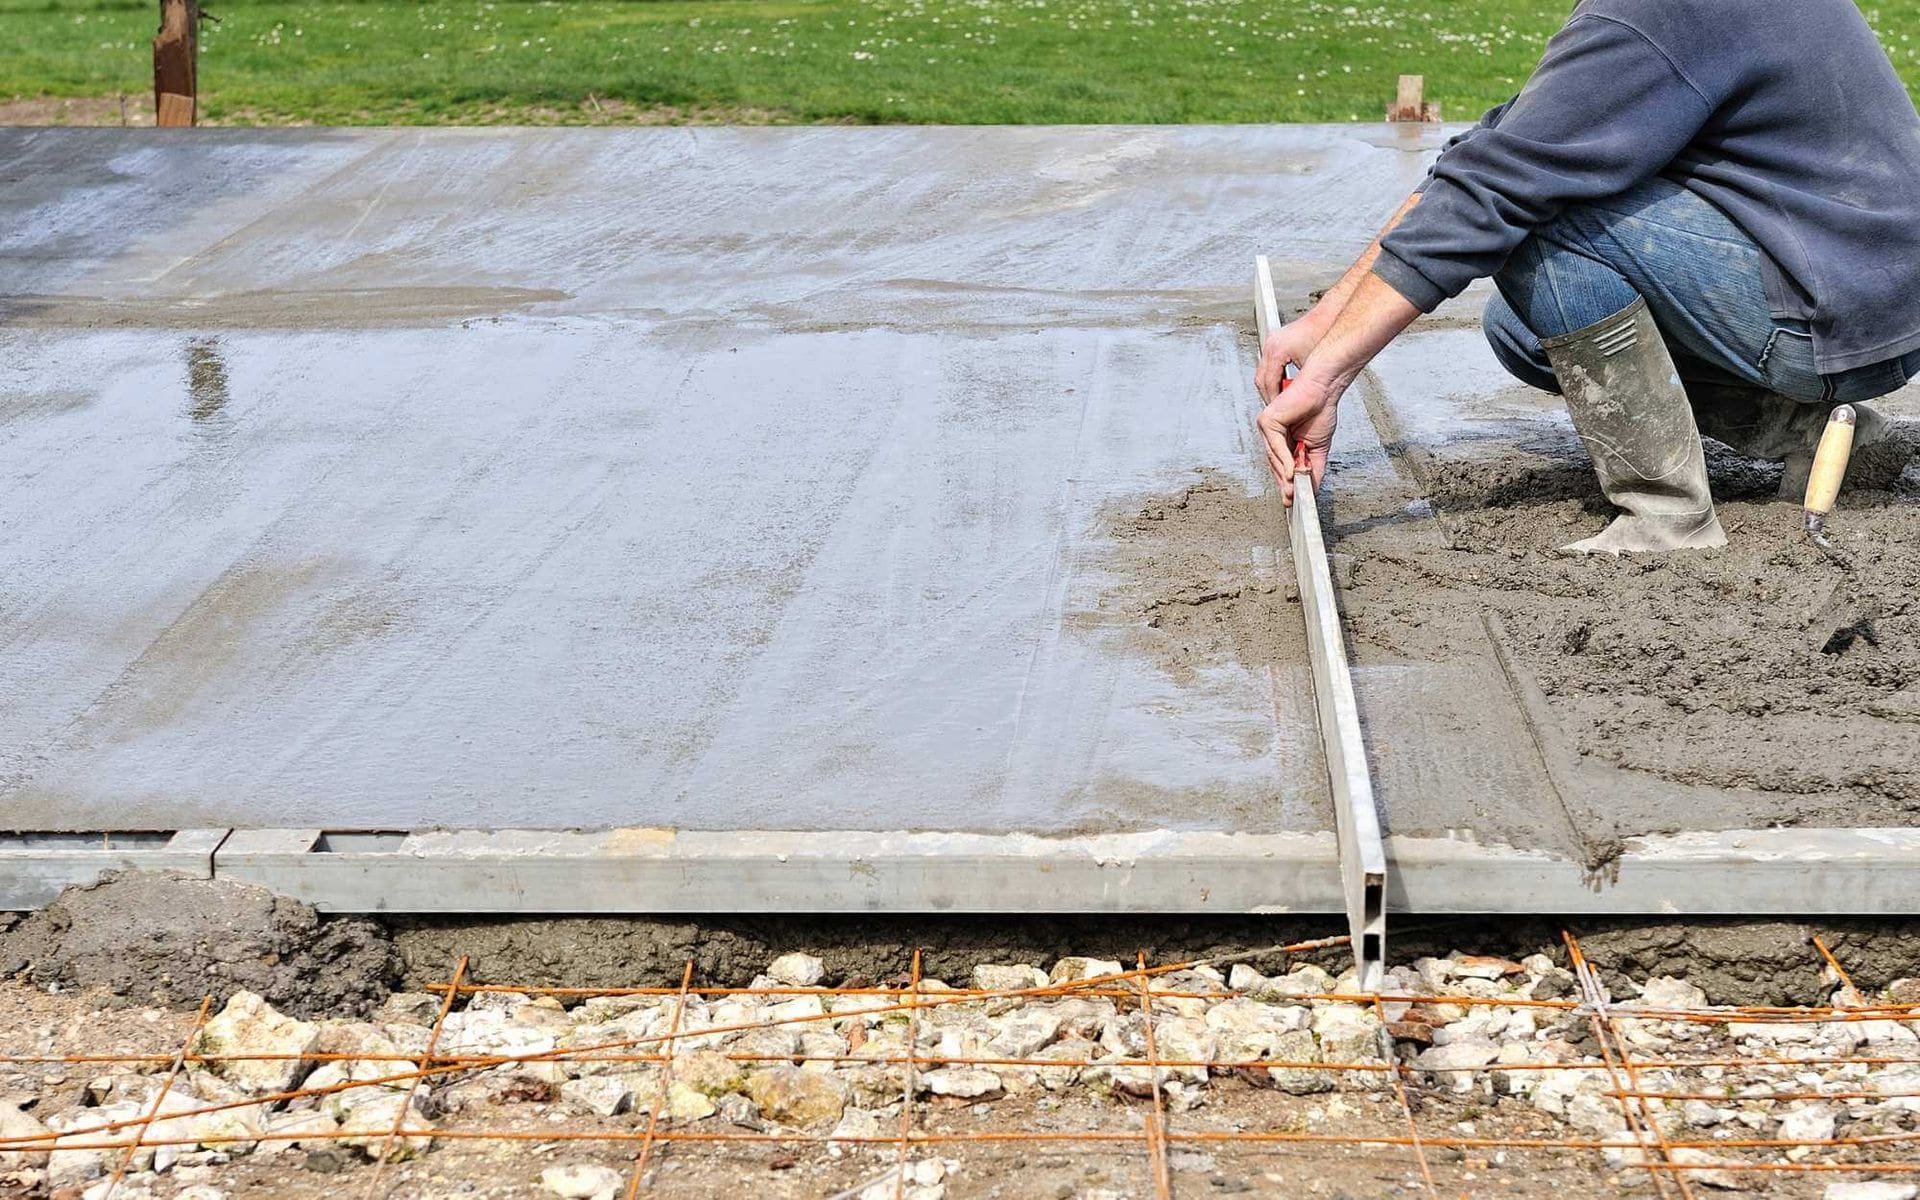 A person is using a long, straight board to level freshly poured concrete on a construction site in El Mirage. Wearing a gray sweatshirt and rubber boots, they ensure the concrete meets West Valley Concrete standards. The mix smooths out, with some wire mesh and rocks visible at the edge of the pour.